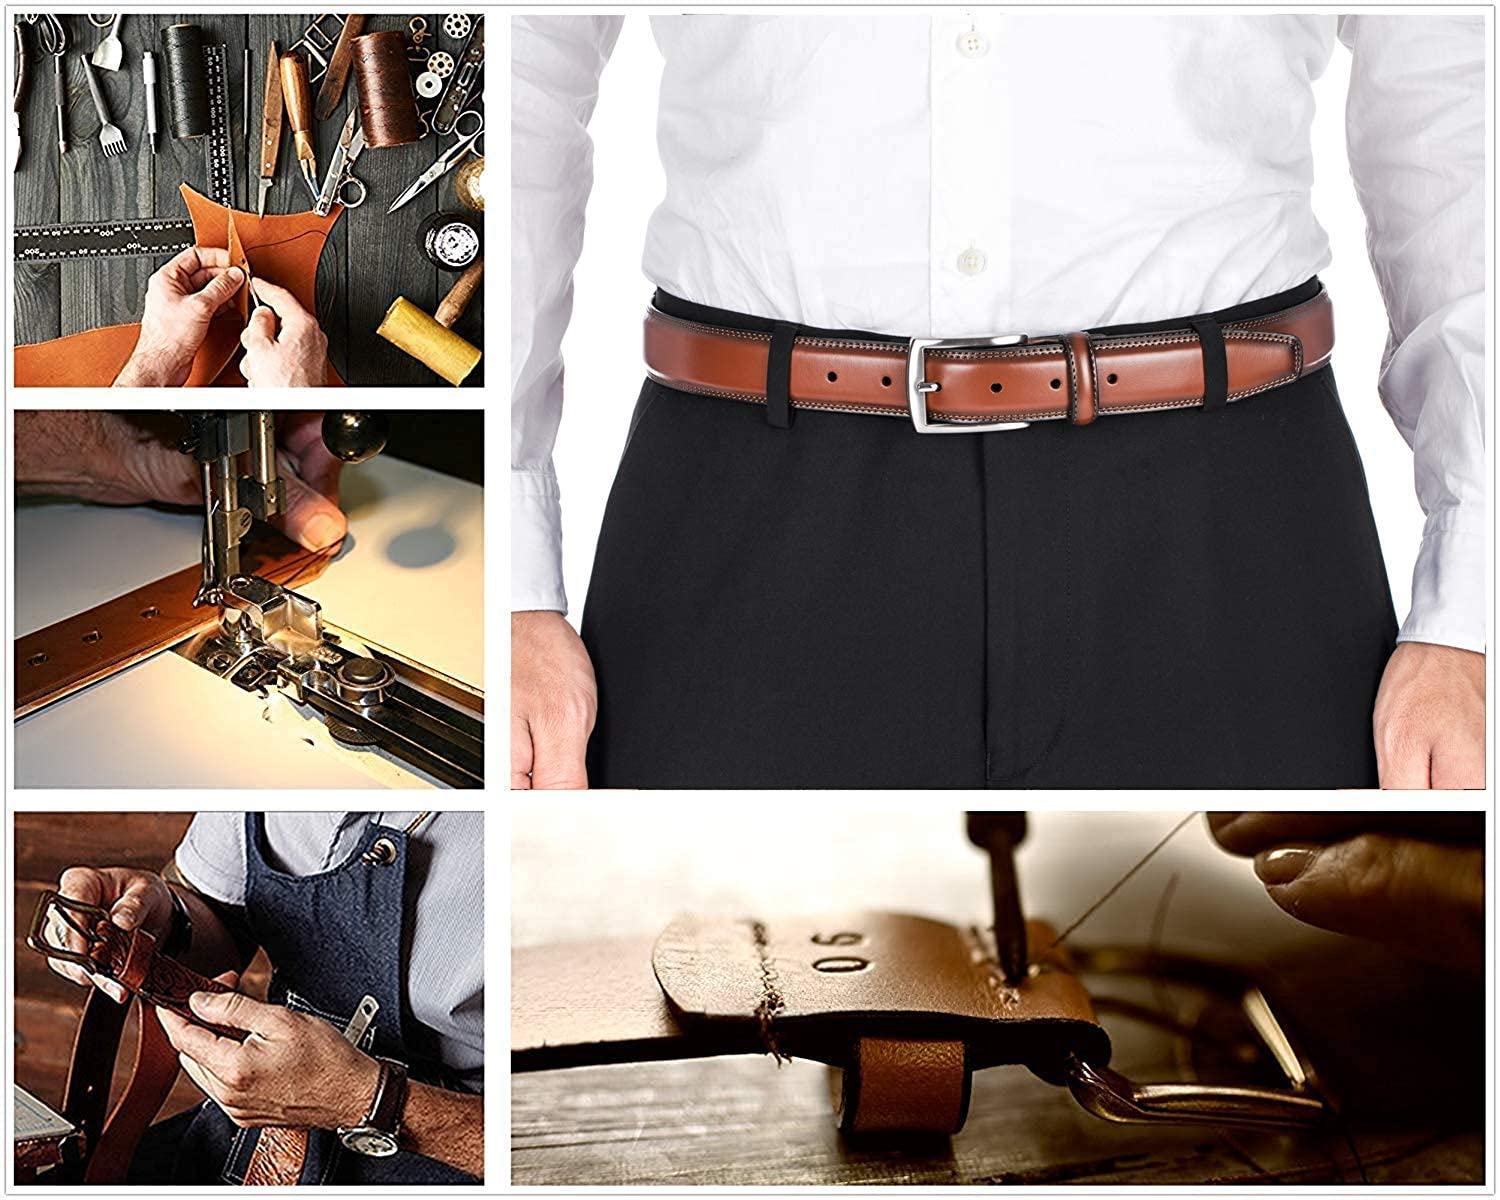 KM Legend Men's Leather Dress Belt-Classic & Fashion for Work Business and Casual